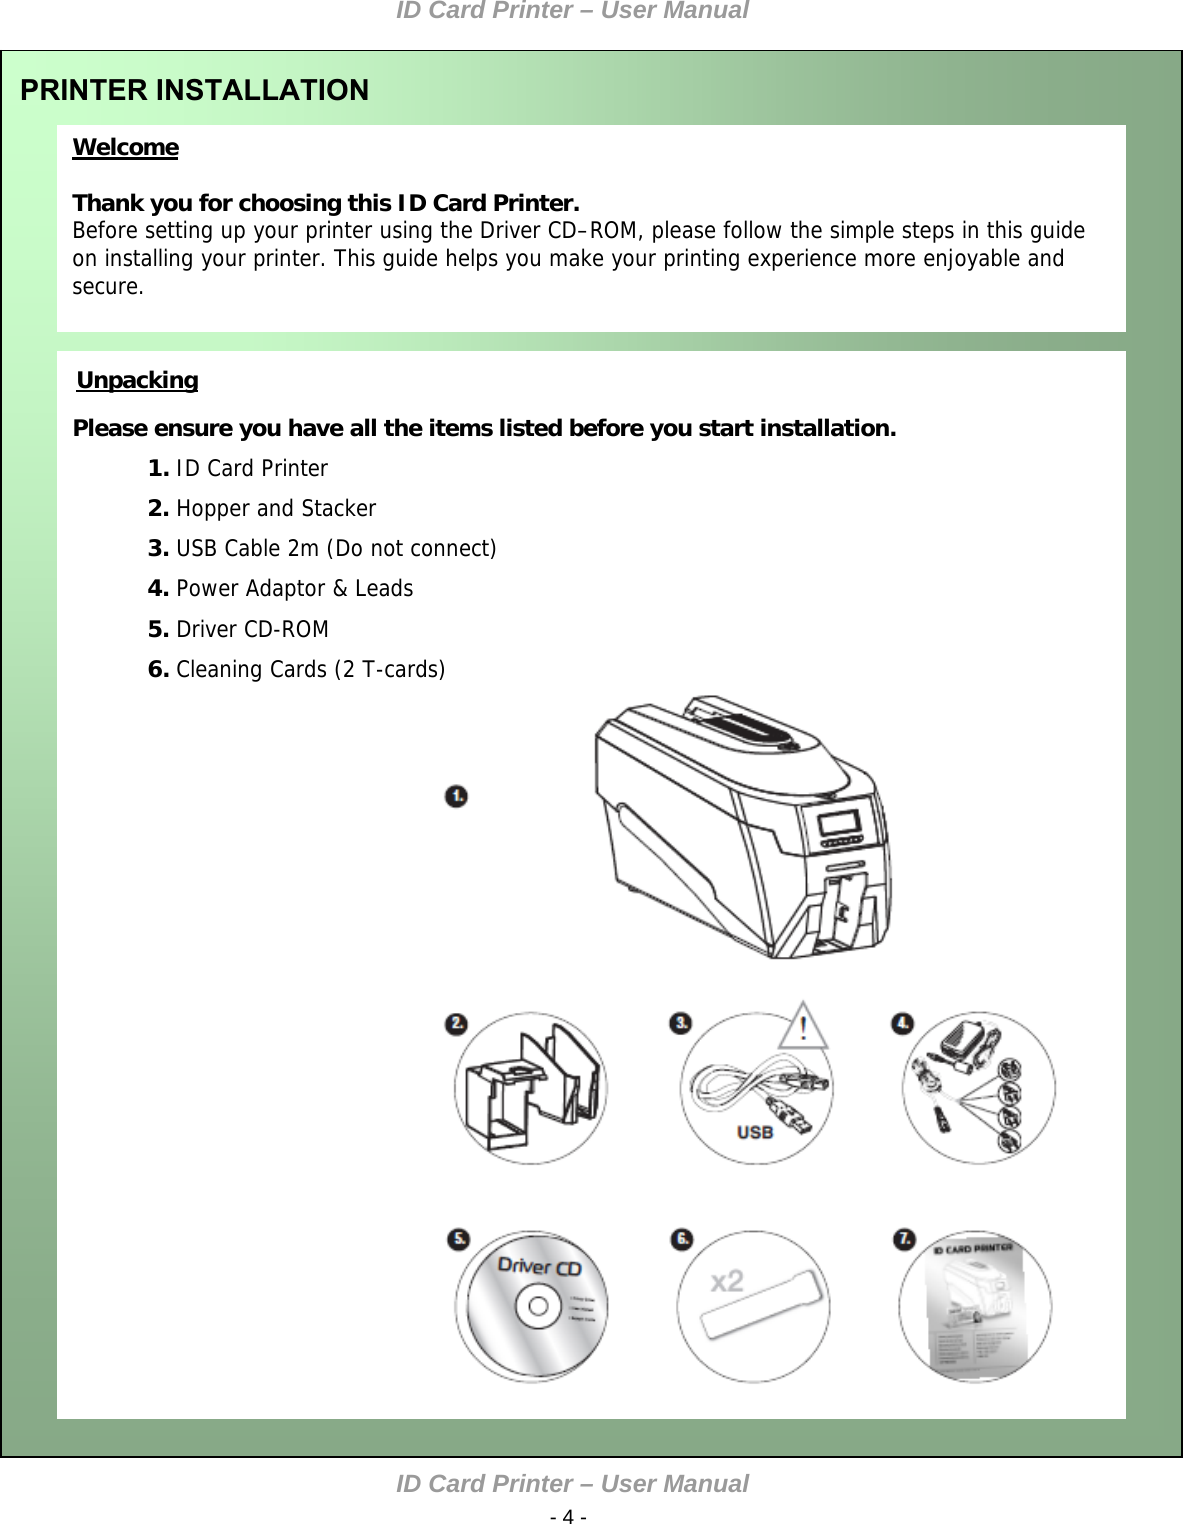 ID Card Printer – User Manual ID Card Printer – User Manual  - 4 -  Welcome  Thank you for choosing this ID Card Printer. Before setting up your printer using the Driver CD–ROM, please follow the simple steps in this guide on installing your printer. This guide helps you make your printing experience more enjoyable and secure.  PRINTER INSTALLATION       Please ensure you have all the items listed before you start installation. Unpacking  1. ID Card Printer 2. Hopper and Stacker 3. USB Cable 2m (Do not connect) 4. Power Adaptor &amp; Leads 5. Driver CD-ROM     6. Cleaning Cards (2 T-cards)  